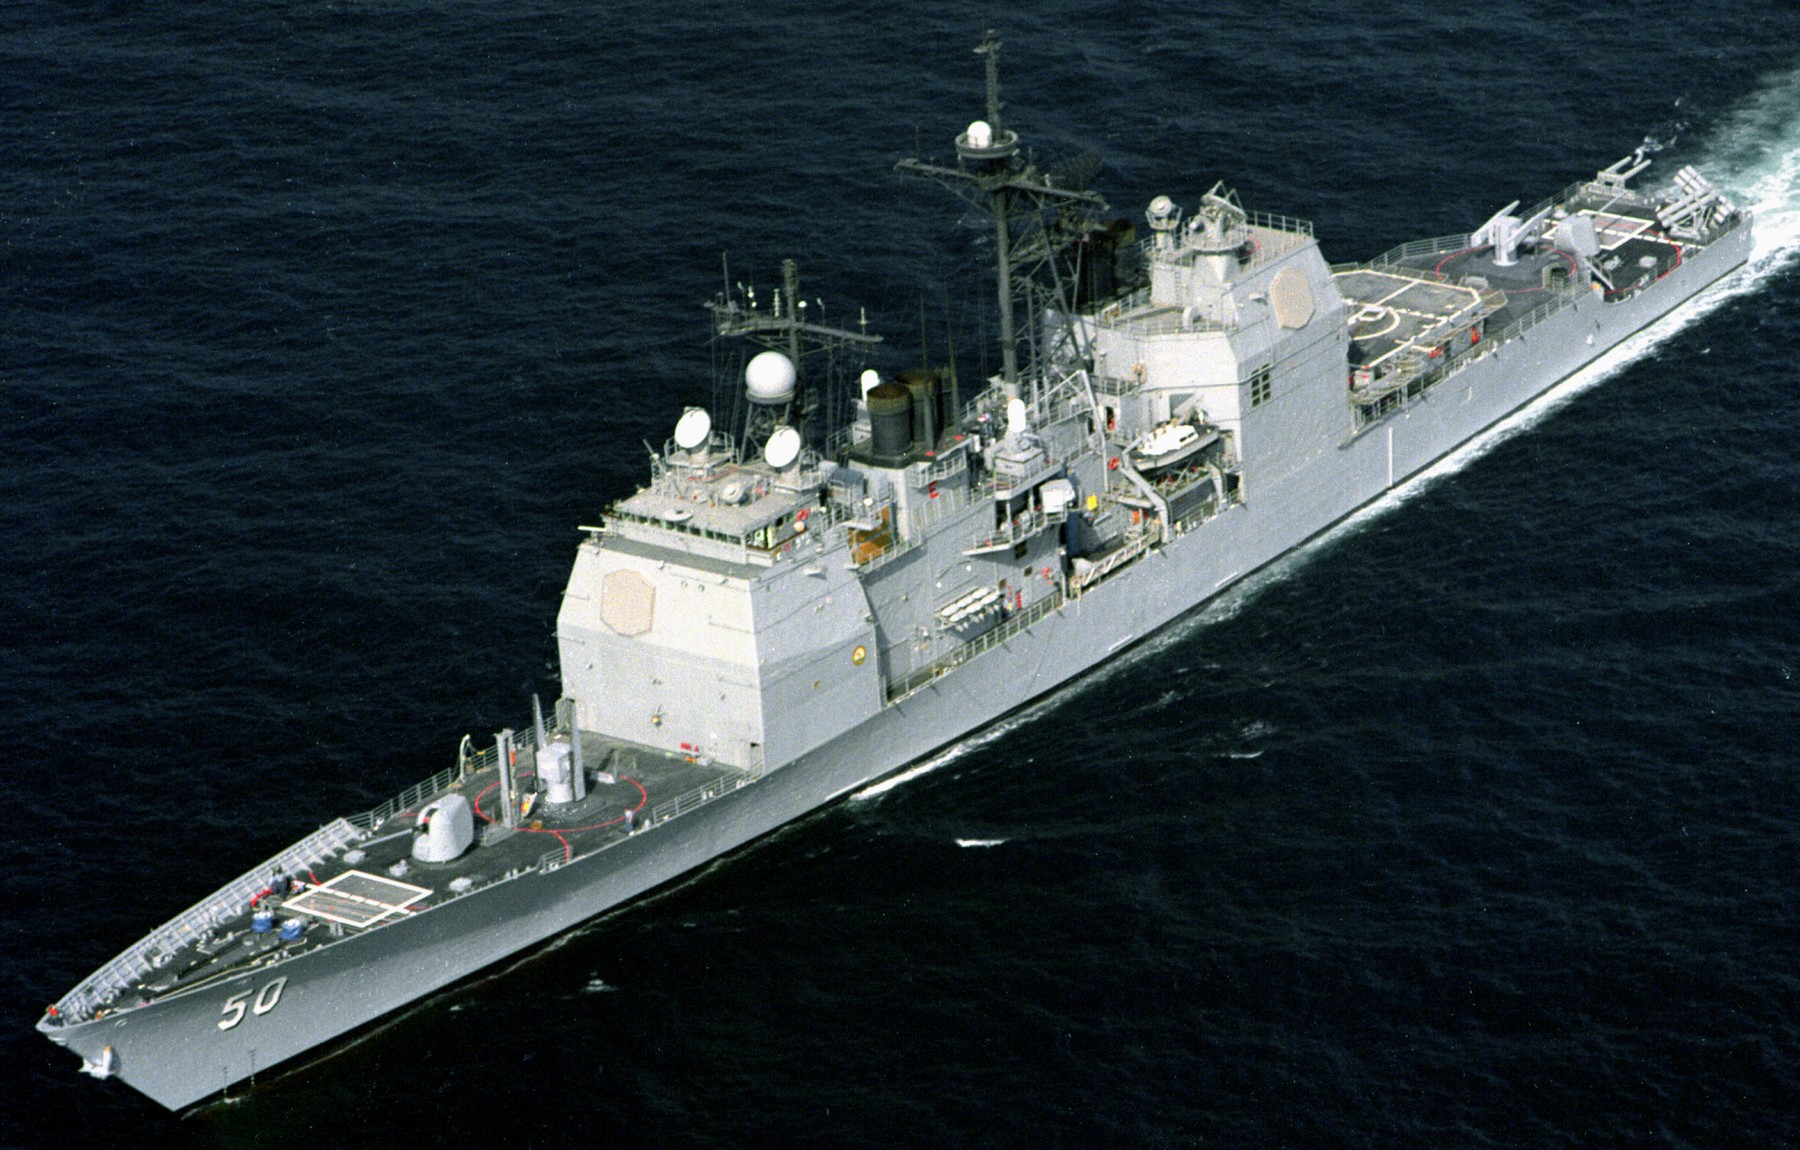 cg-50 uss valley forge ticonderoga class guided missile cruiser aegis us navy pacific ocean 45